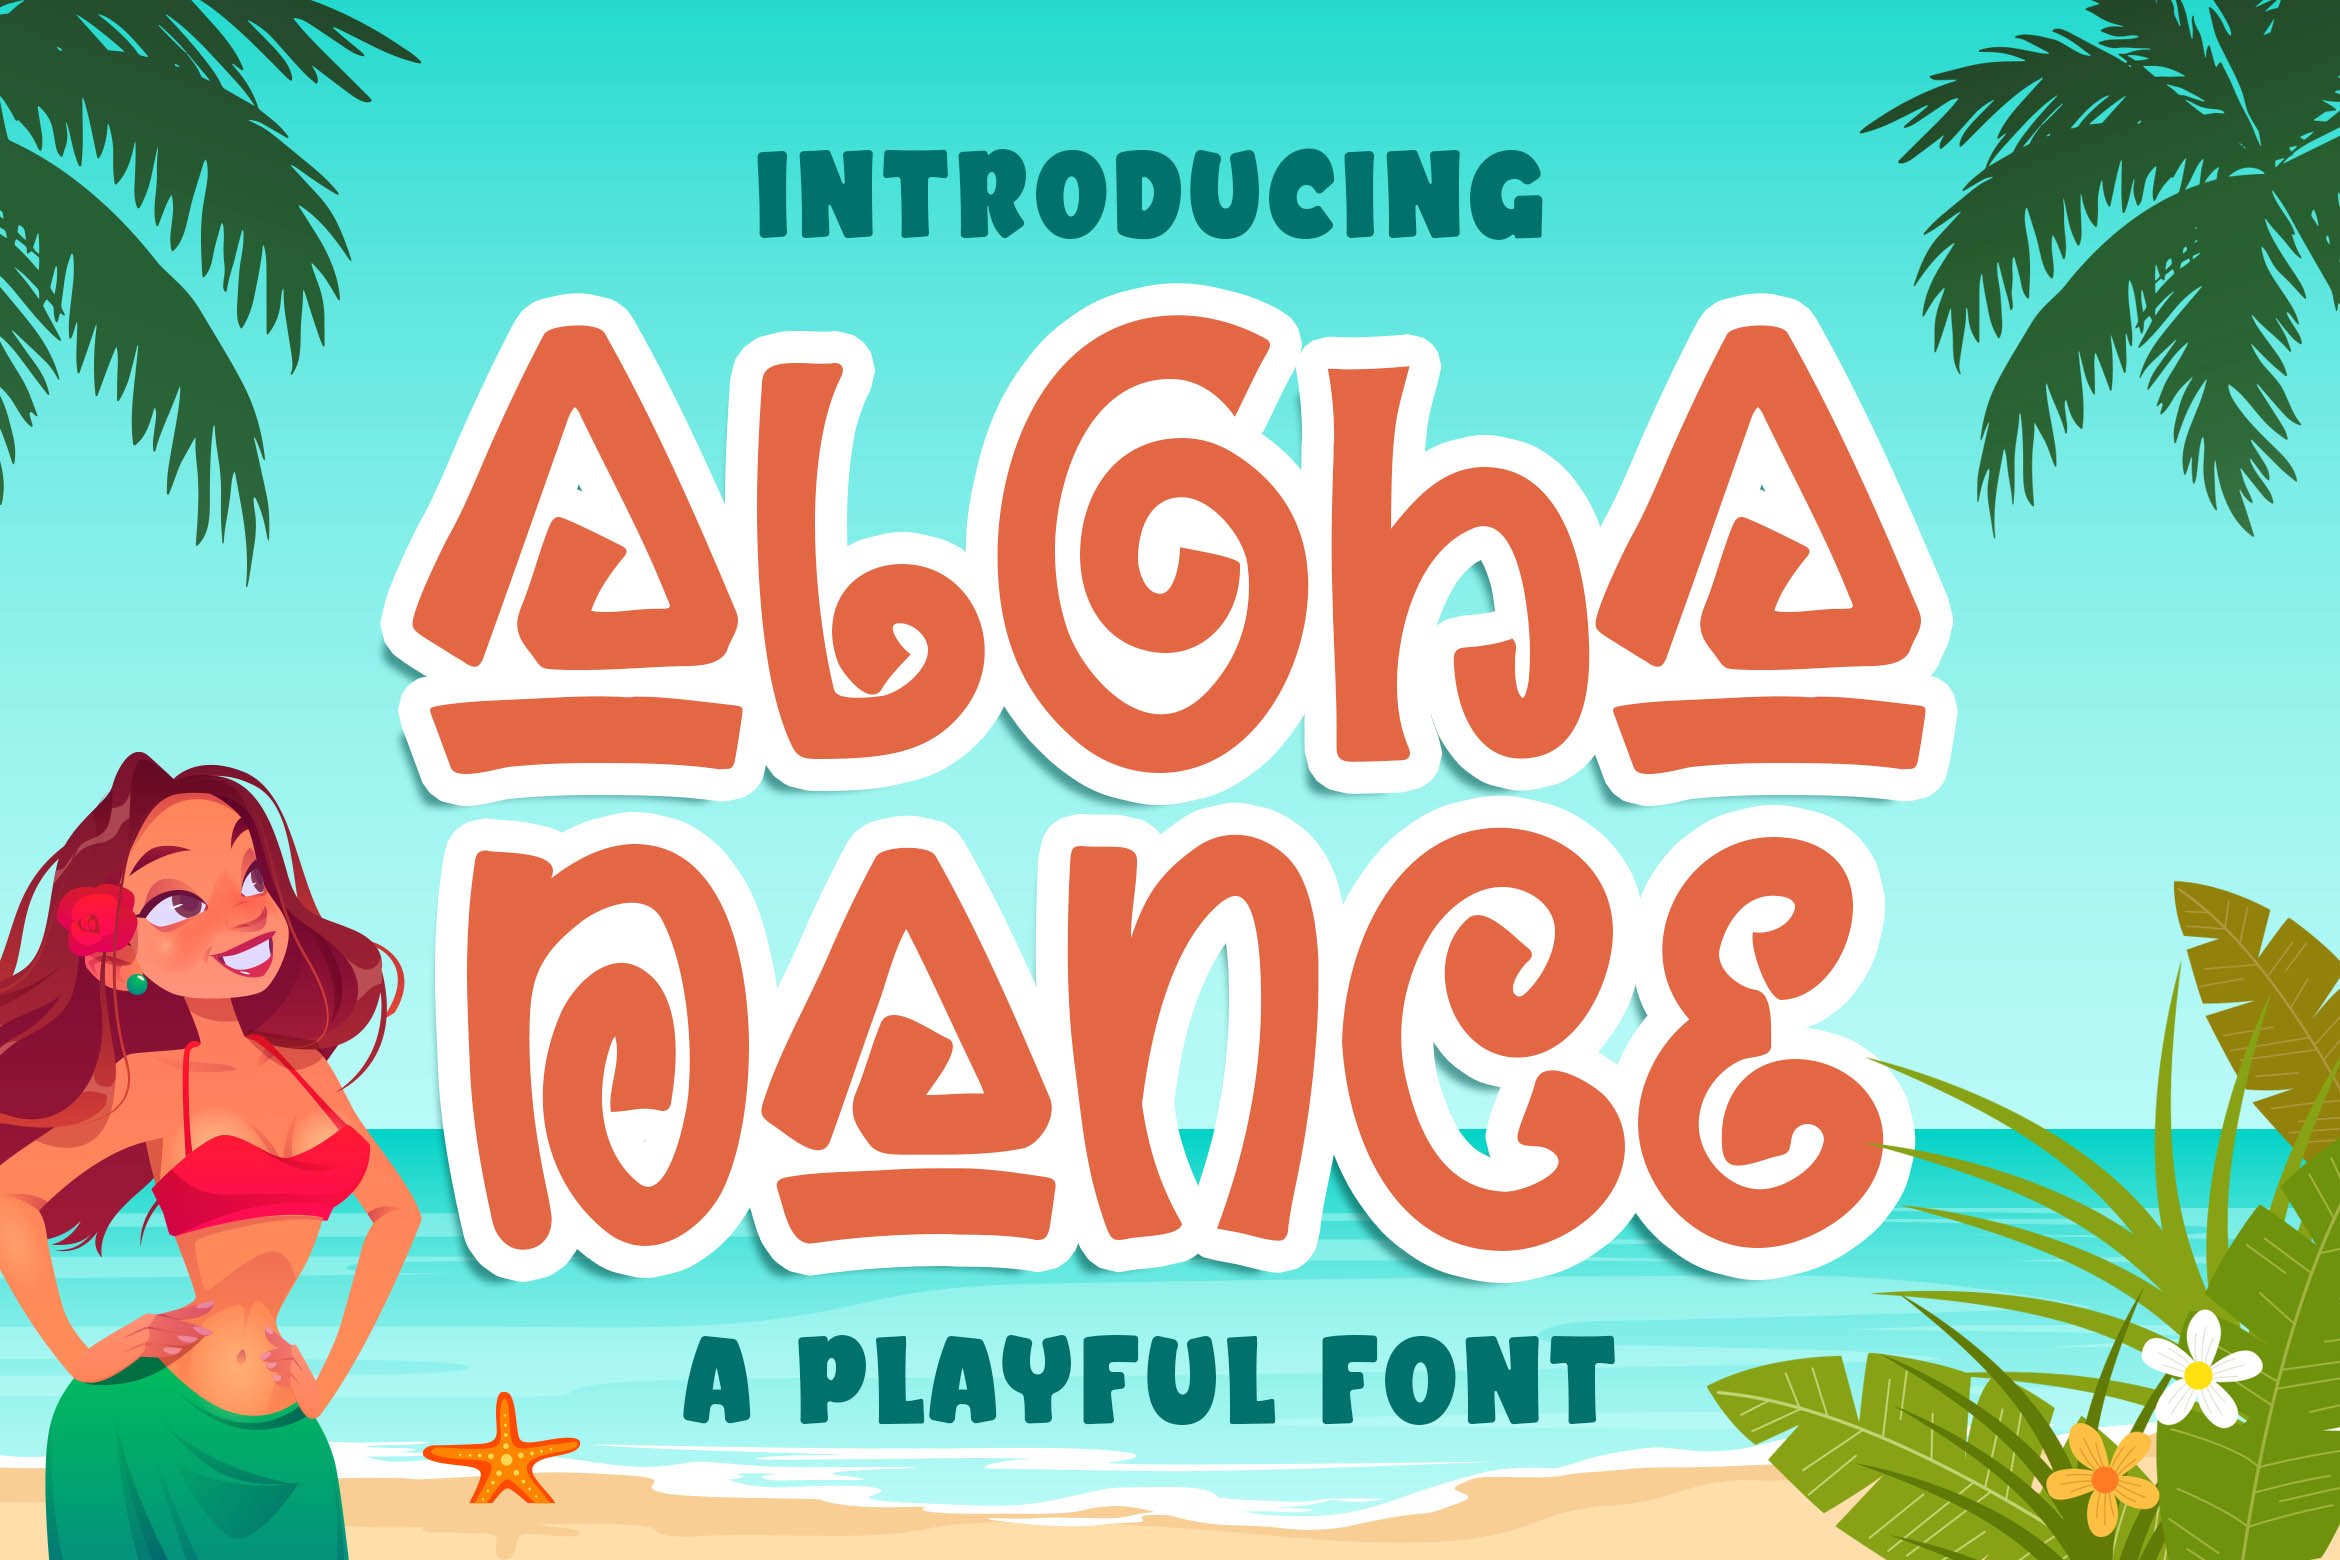 Aloha Dance a Quirky & Playful Font cover image.